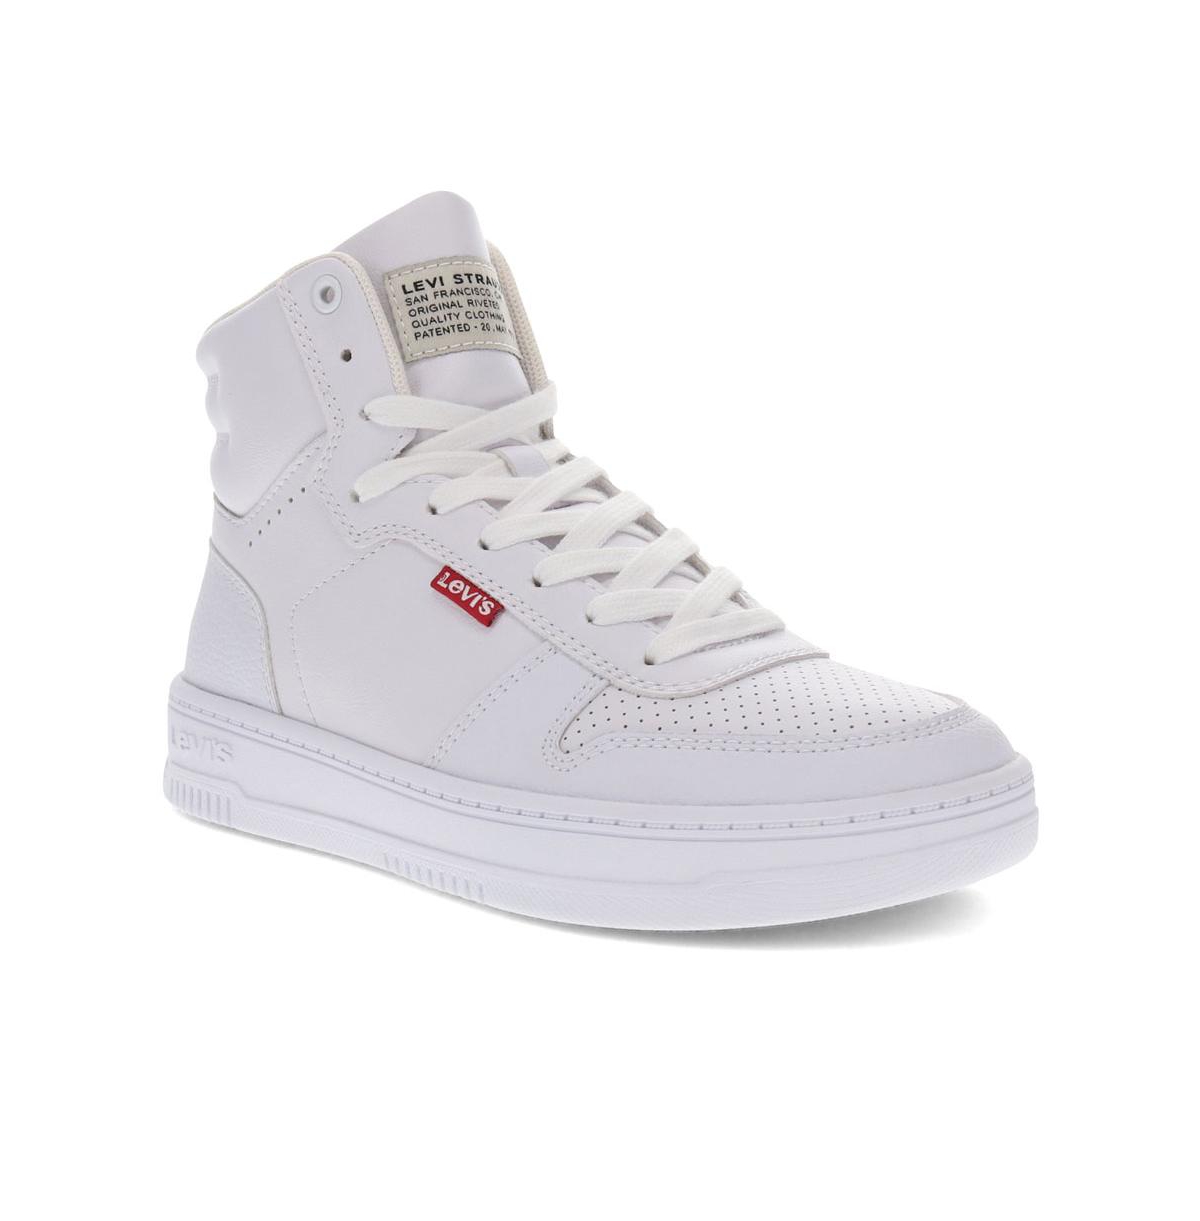 Levi's Women's Drive Hi Synthetic Leather Casual High-top Sneaker Shoe In White Mono